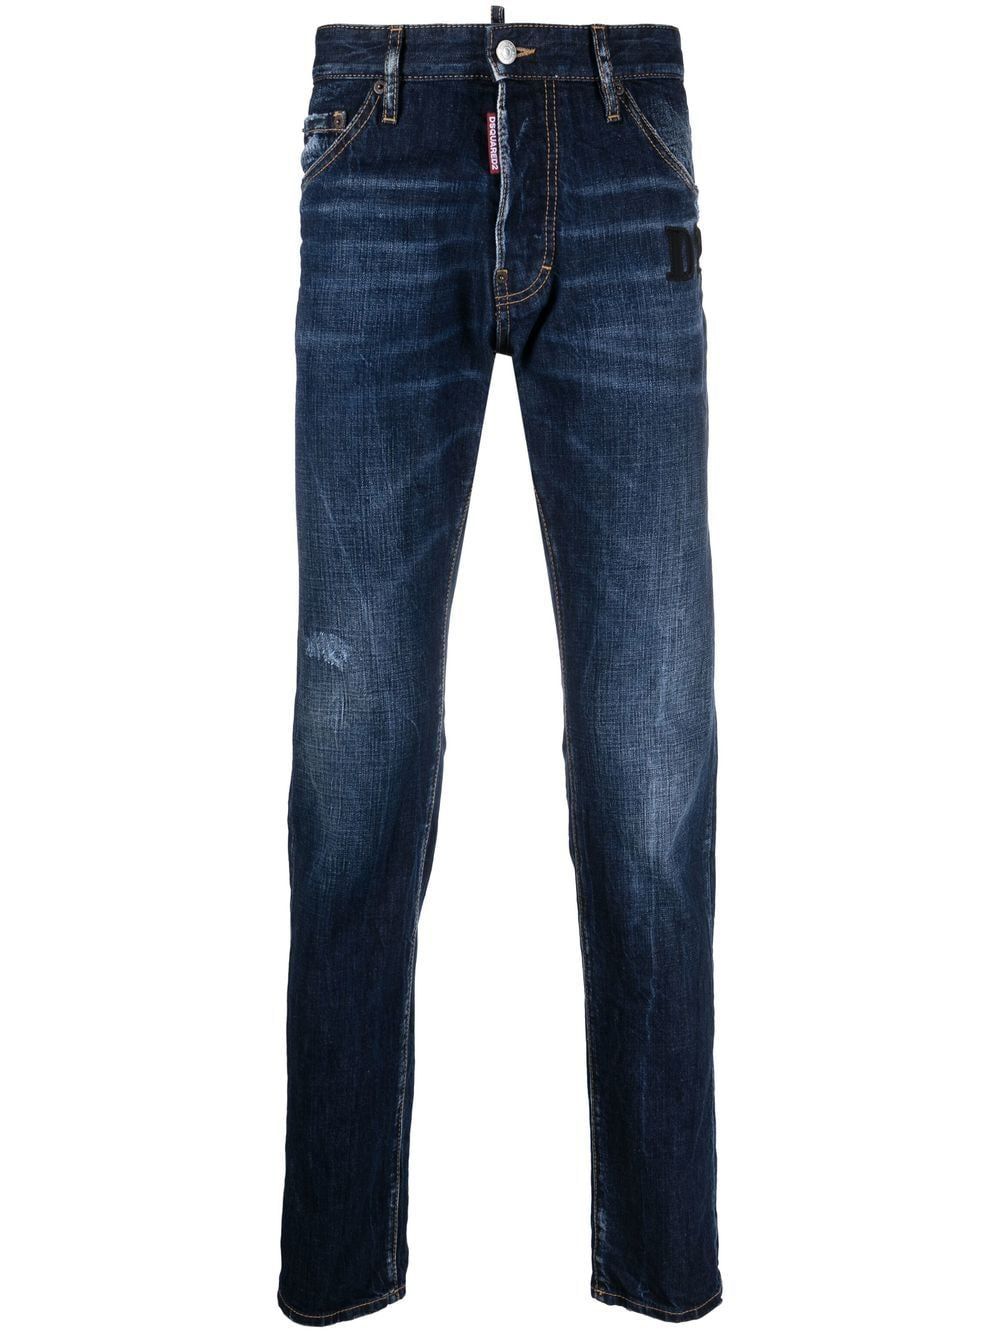 DSQUARED2 Blue Navy 5-Pocket Pants for Men - SS23 Collection